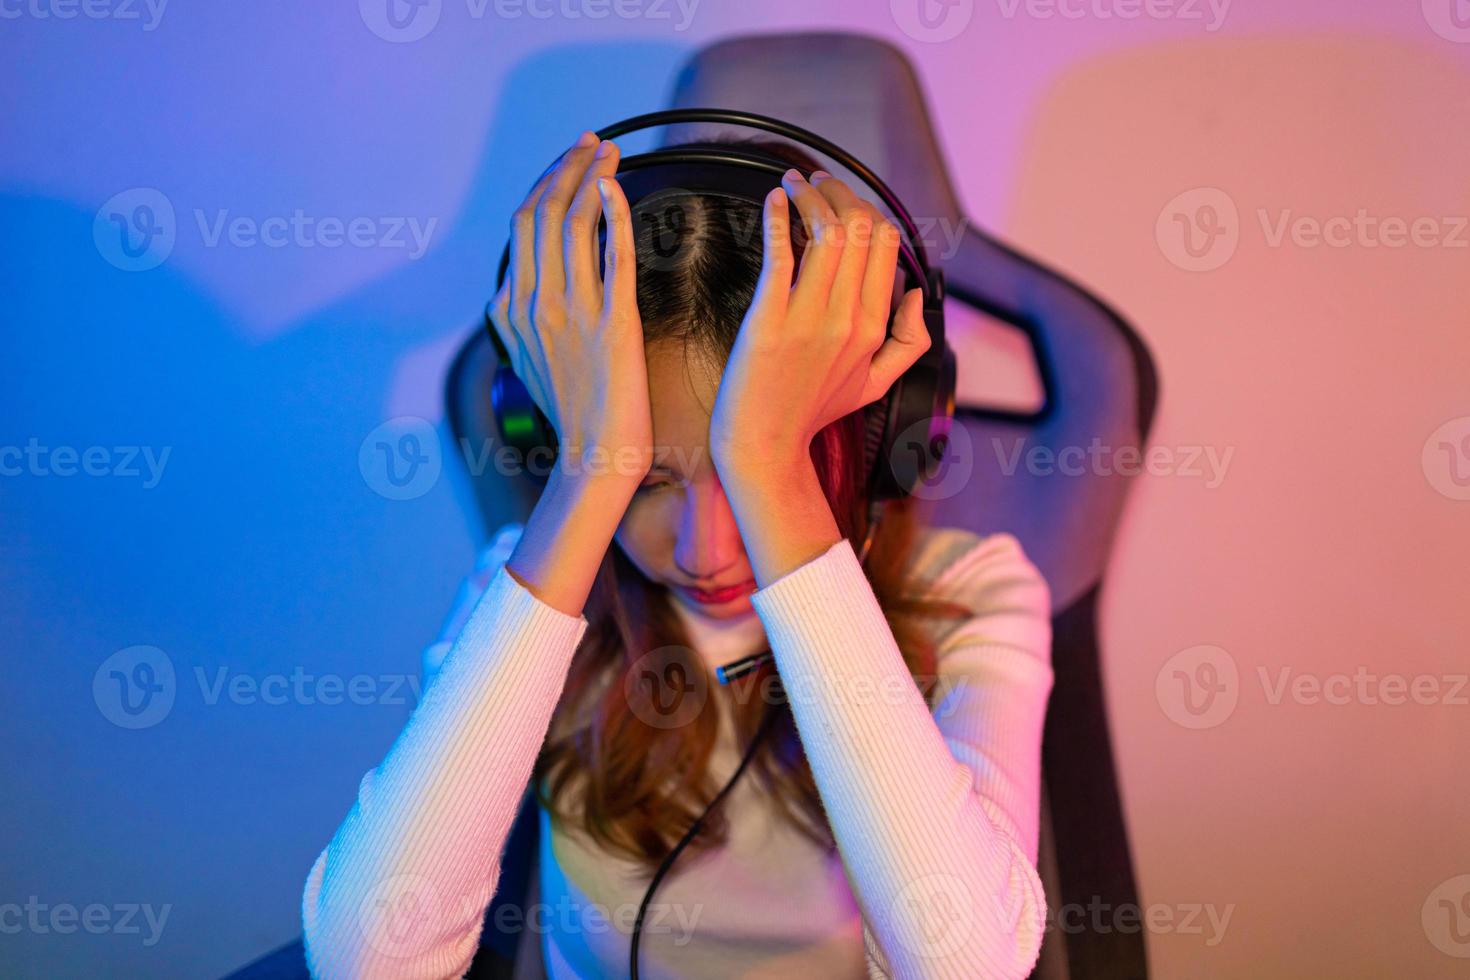 Game over loss match. Asian game with headphones playing online video game on computer PC neon light at home feeling sad disappointed about game losing, tournament player E-Sport photo